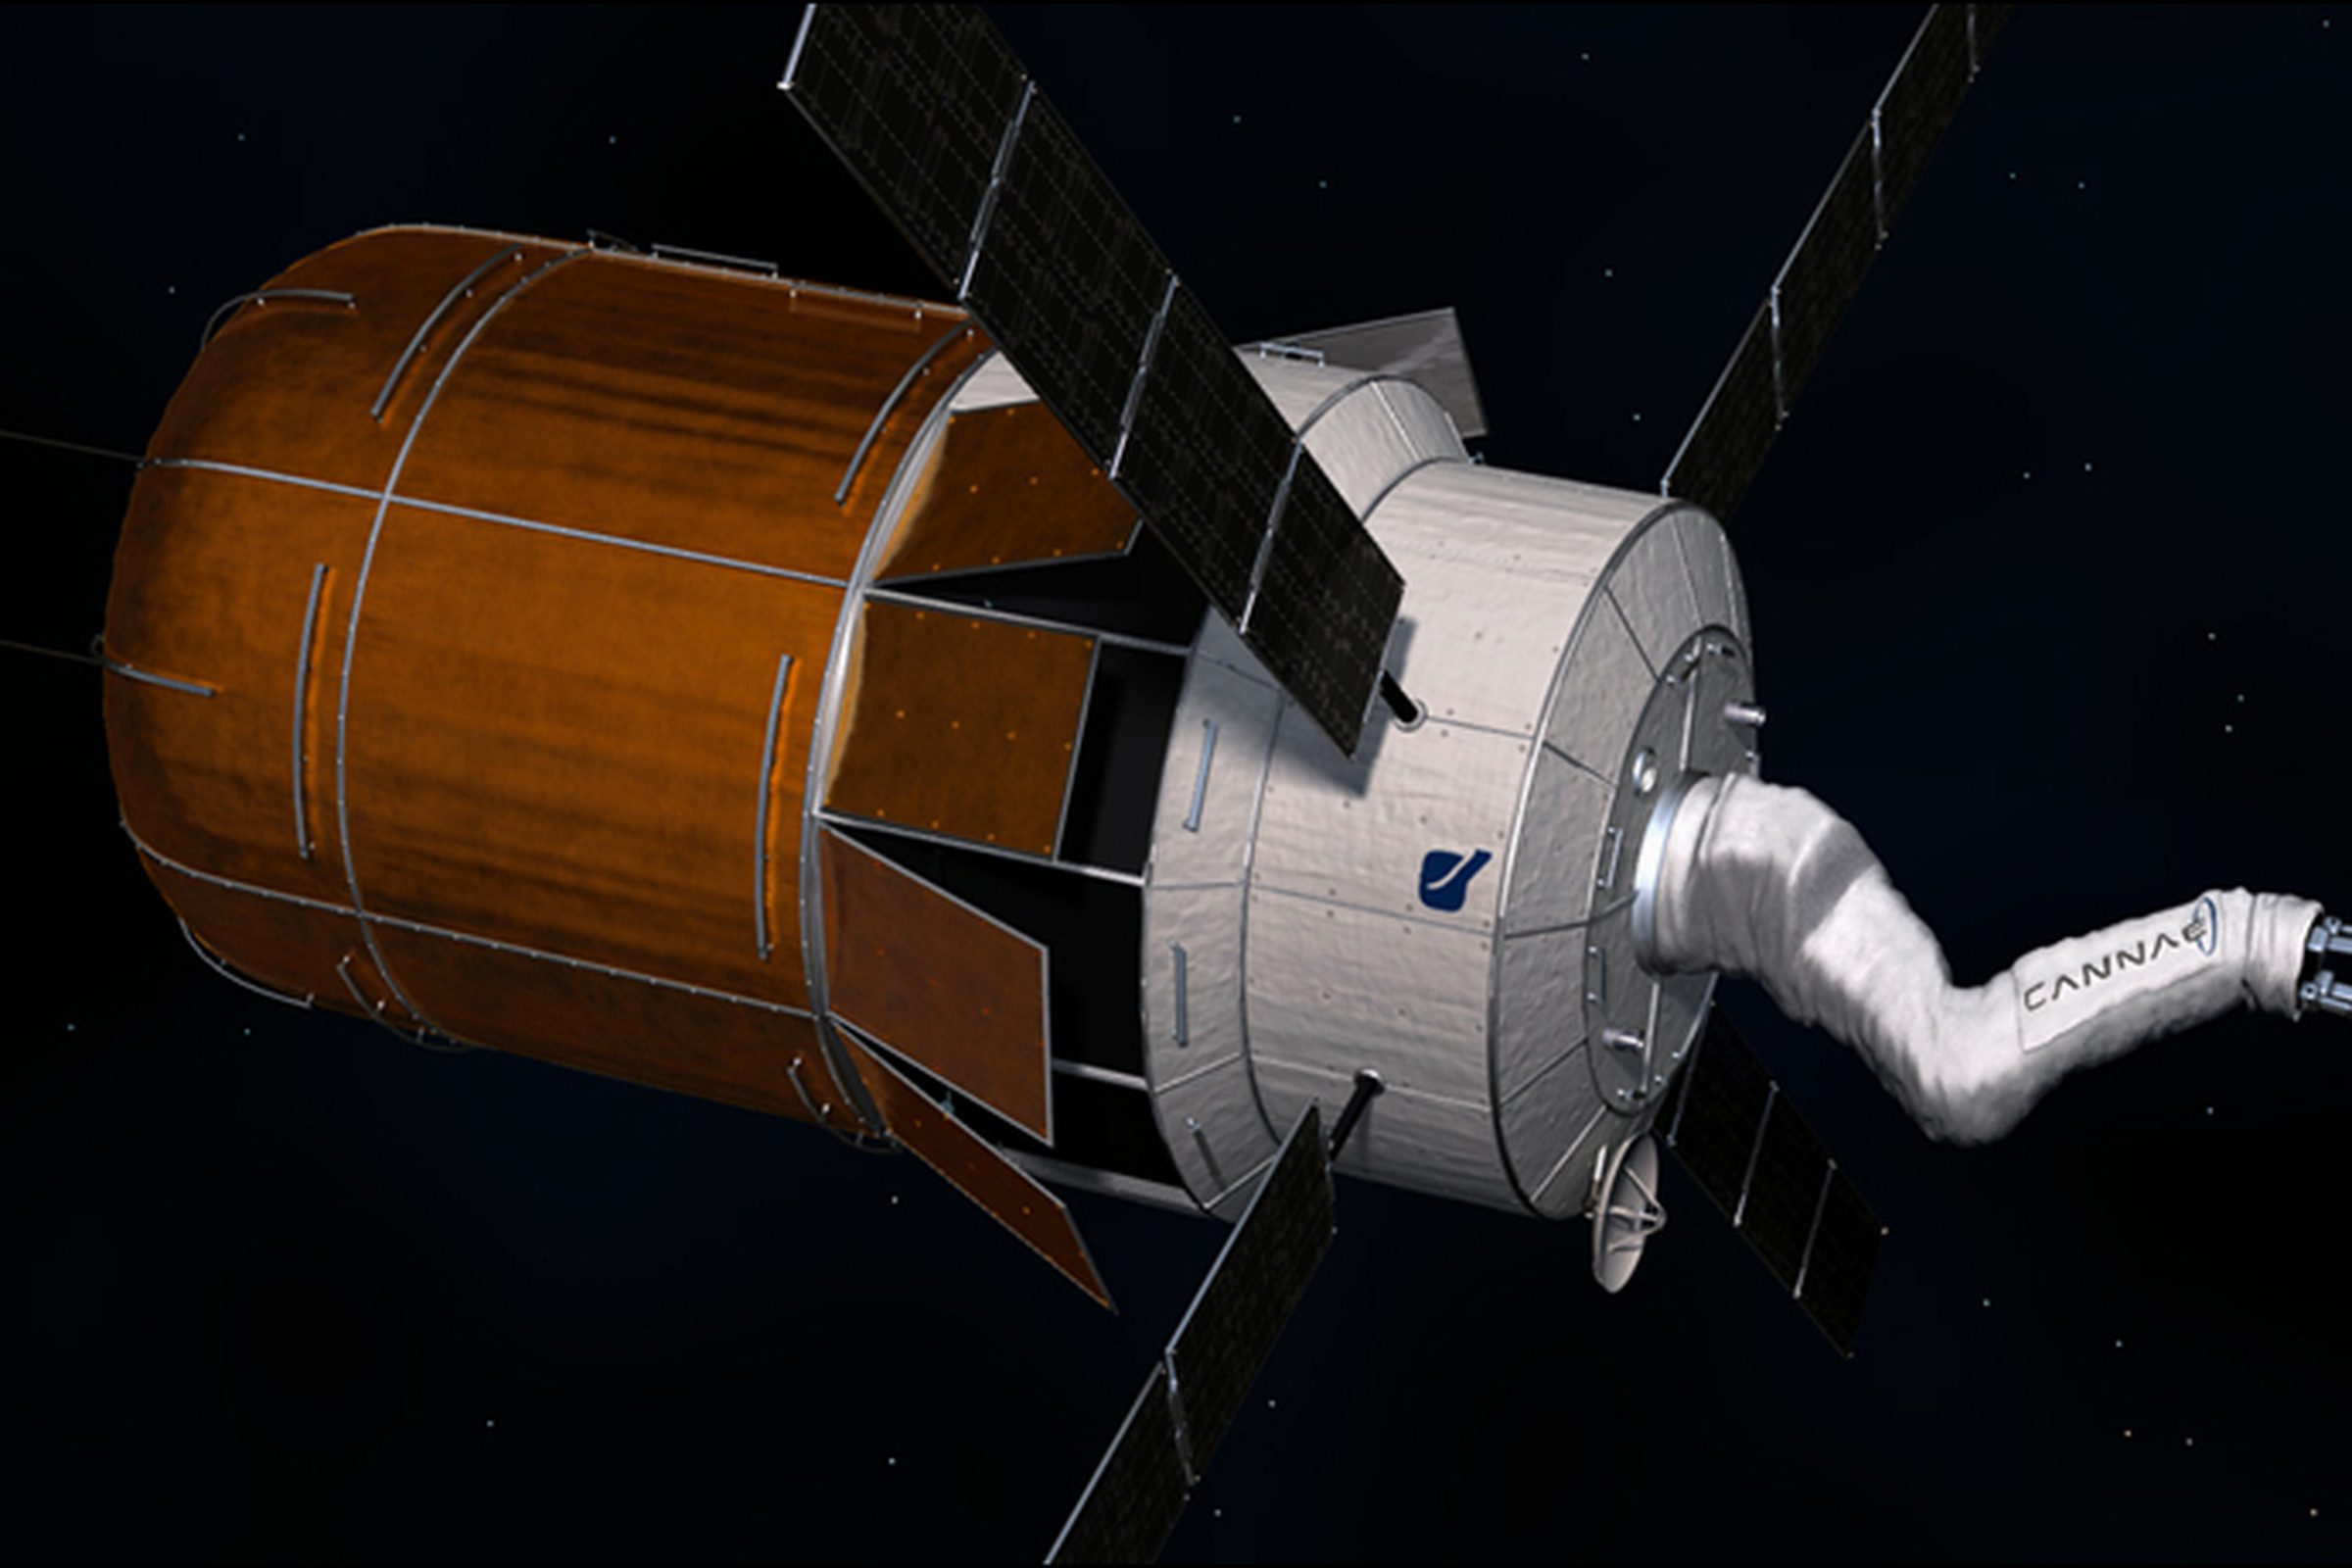 Concept spacecraft with a "Cannae Drive," which uses contained microwaves as propulsion